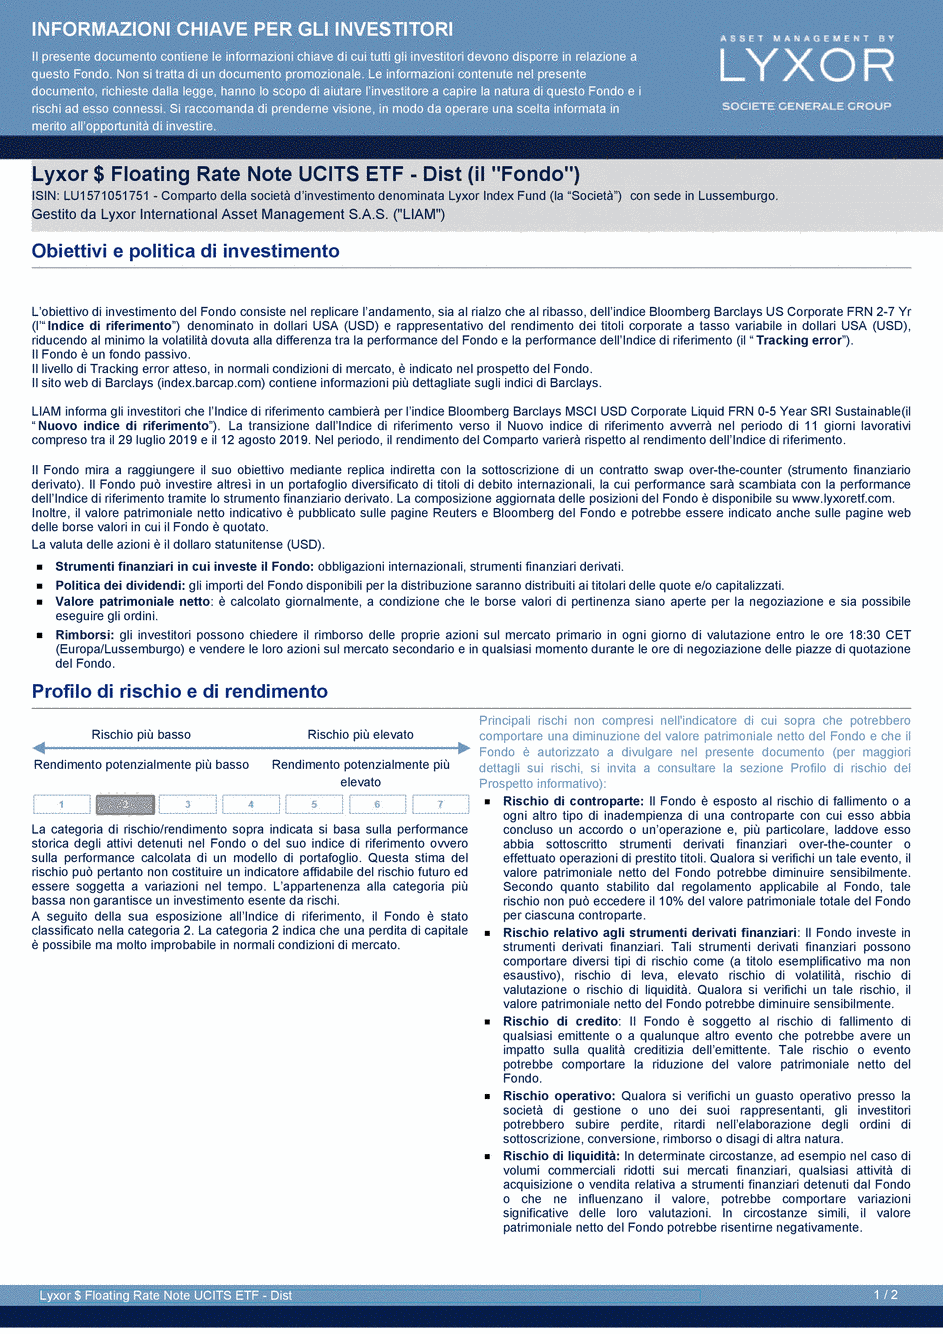 DICI Lyxor $ Floating Rate Note UCITS ETF - Dist - 29/07/2019 - Italien